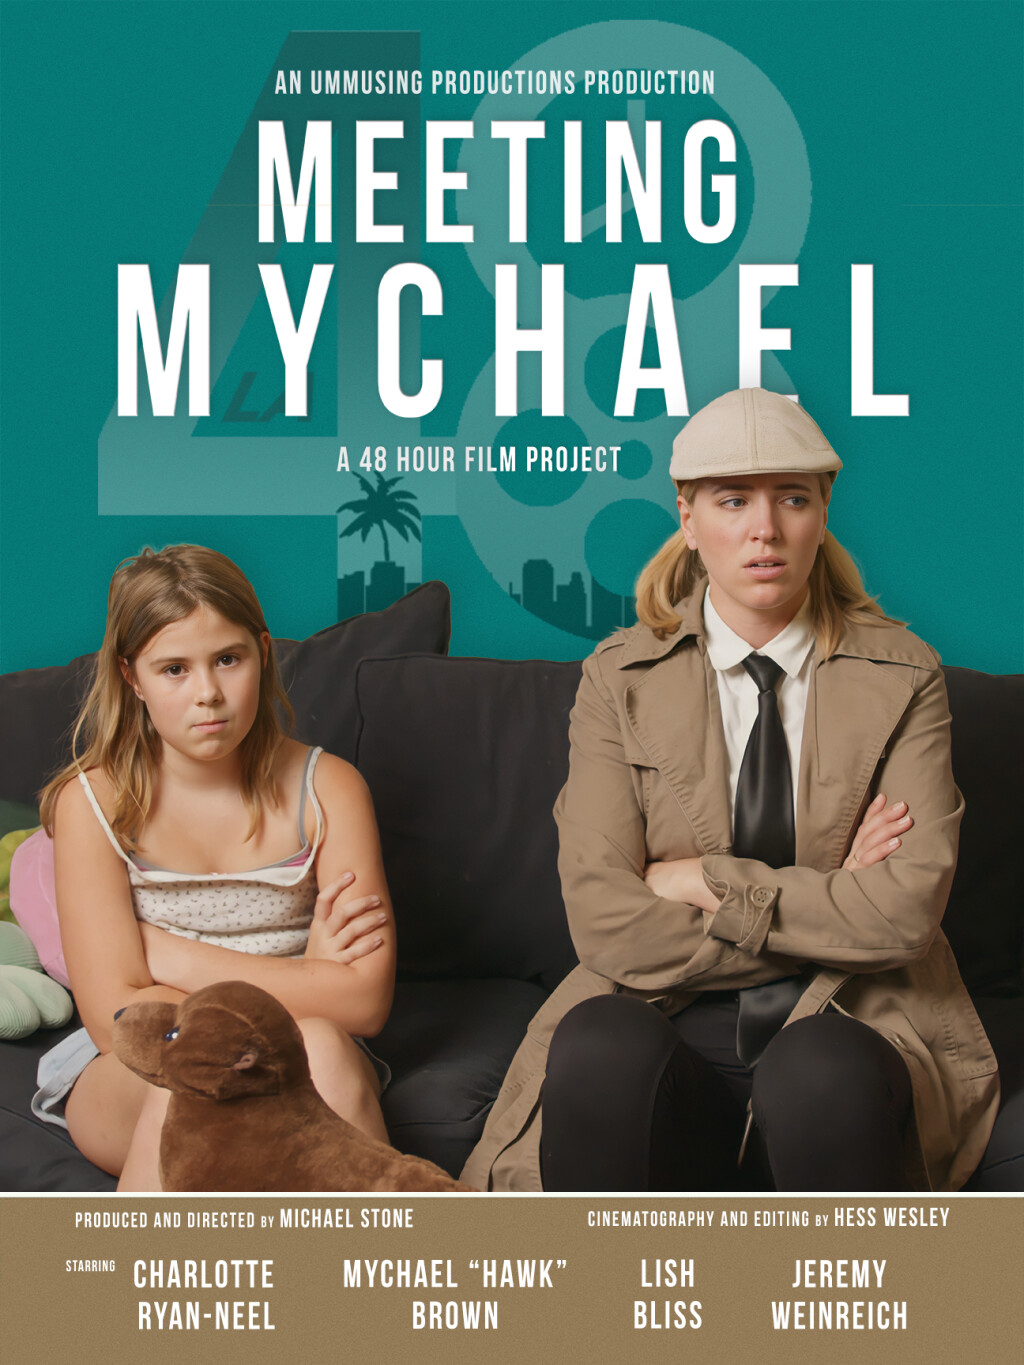 Filmposter for Meeting Mychael